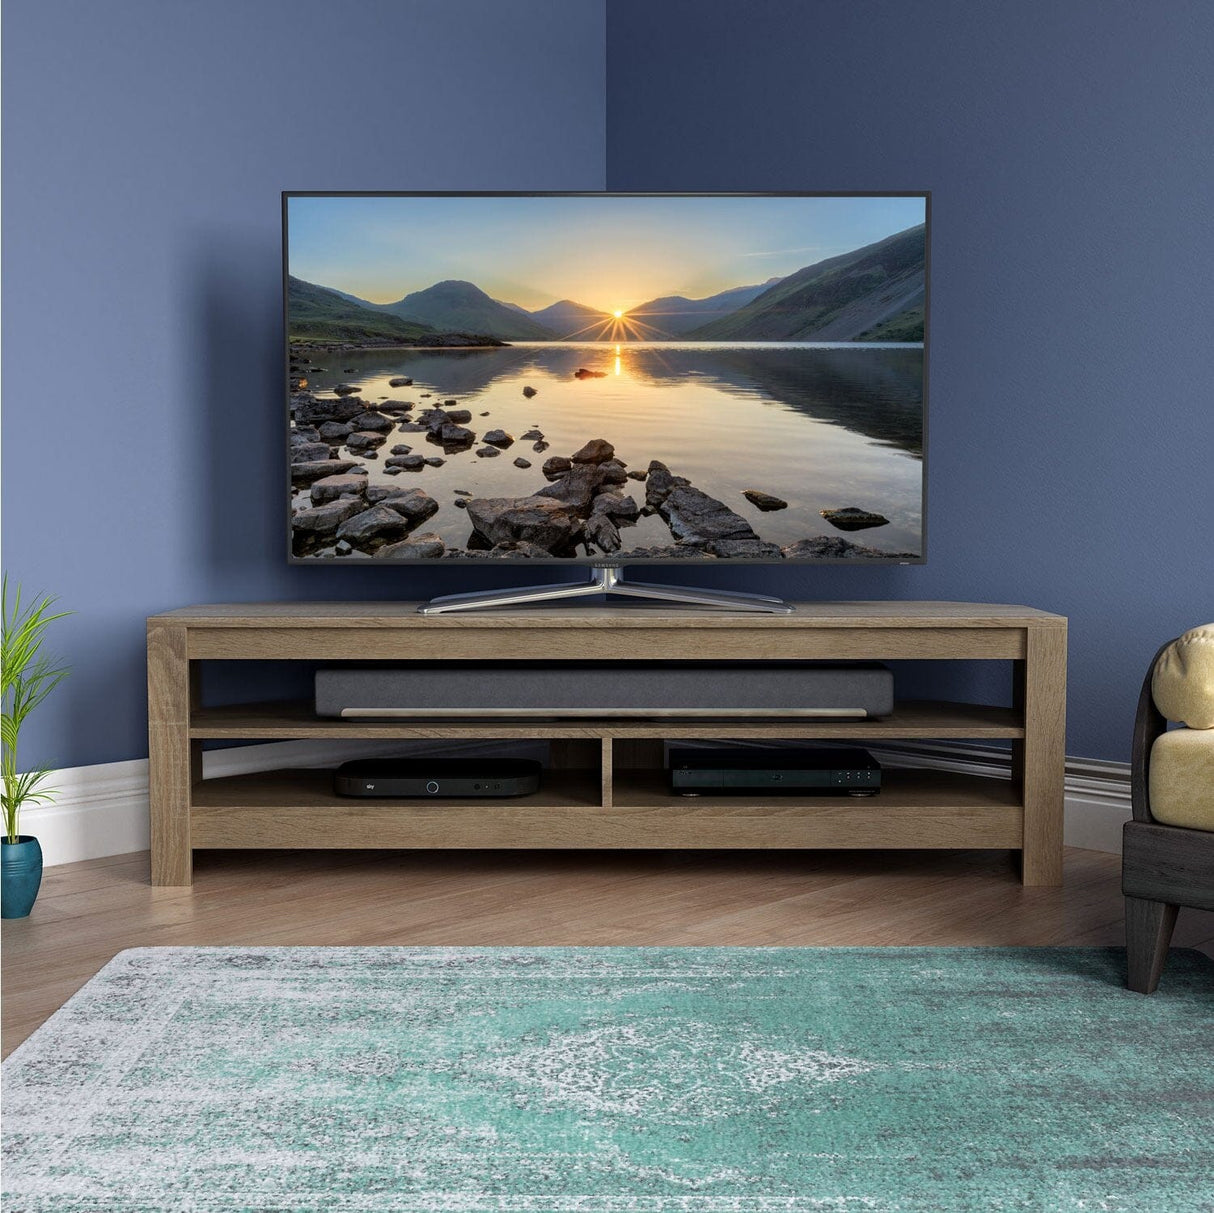 Techlink CA140GO Calibre Flat TV Stand in Rustic Sawn Oak suits Up To 65" TVs